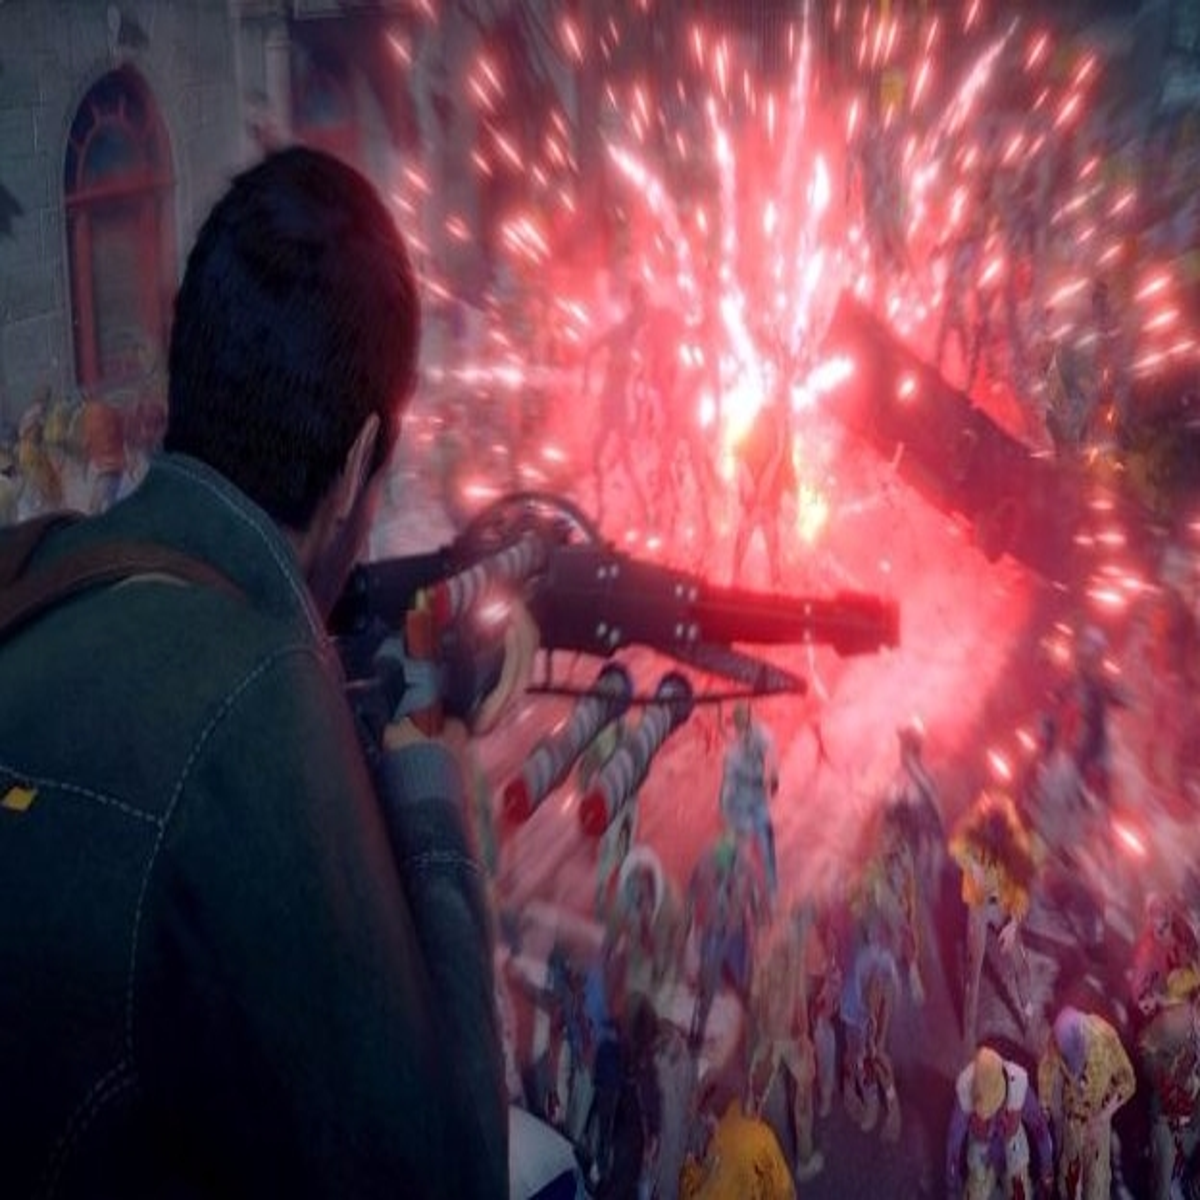 Capcom Vancouver Possibly Working On Dead Rising 5